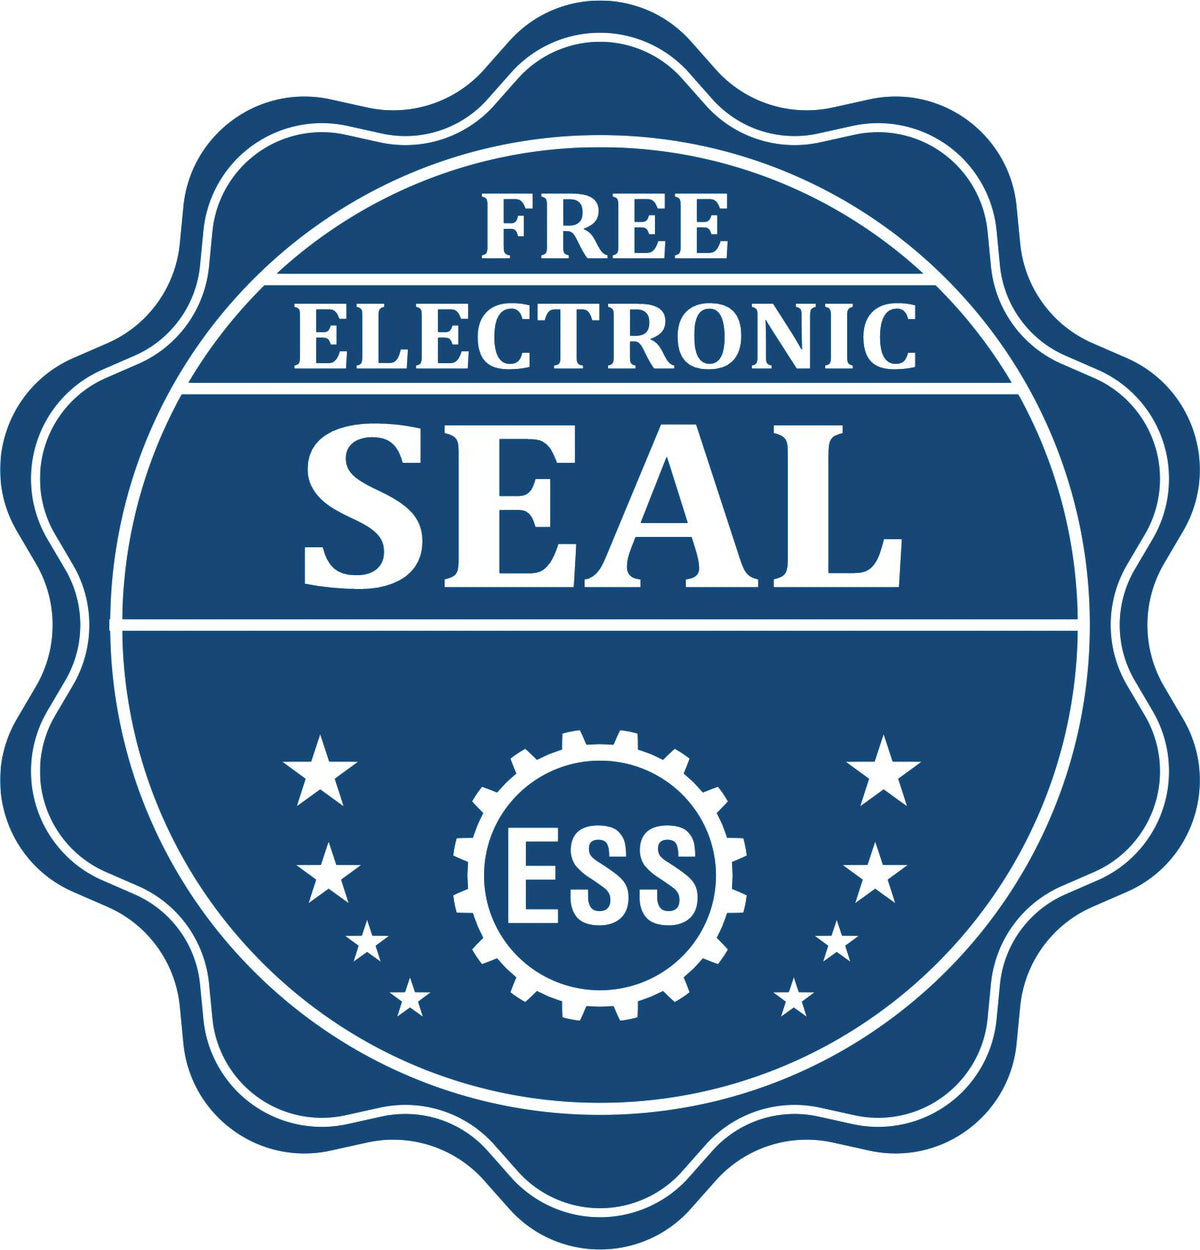 A badge showing a free electronic seal for the Handheld Maine Professional Engineer Embosser with stars and the ESS gear on the emblem.